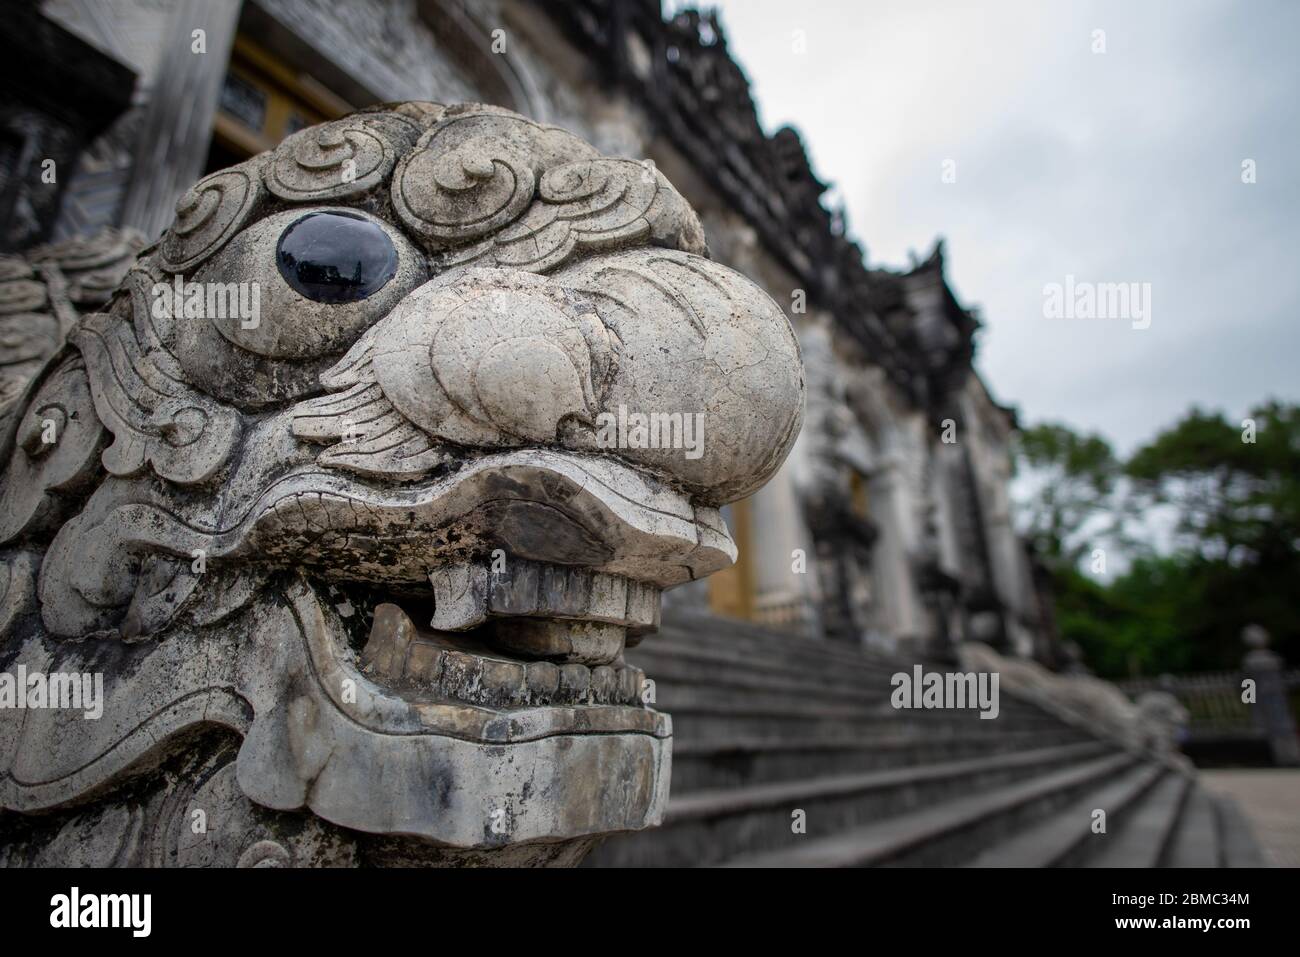 Hue, Vietnam - April 16, 2018: Dragon's head at the Emperor Khai Dinh tomb, with no people and an overcast sky Stock Photo